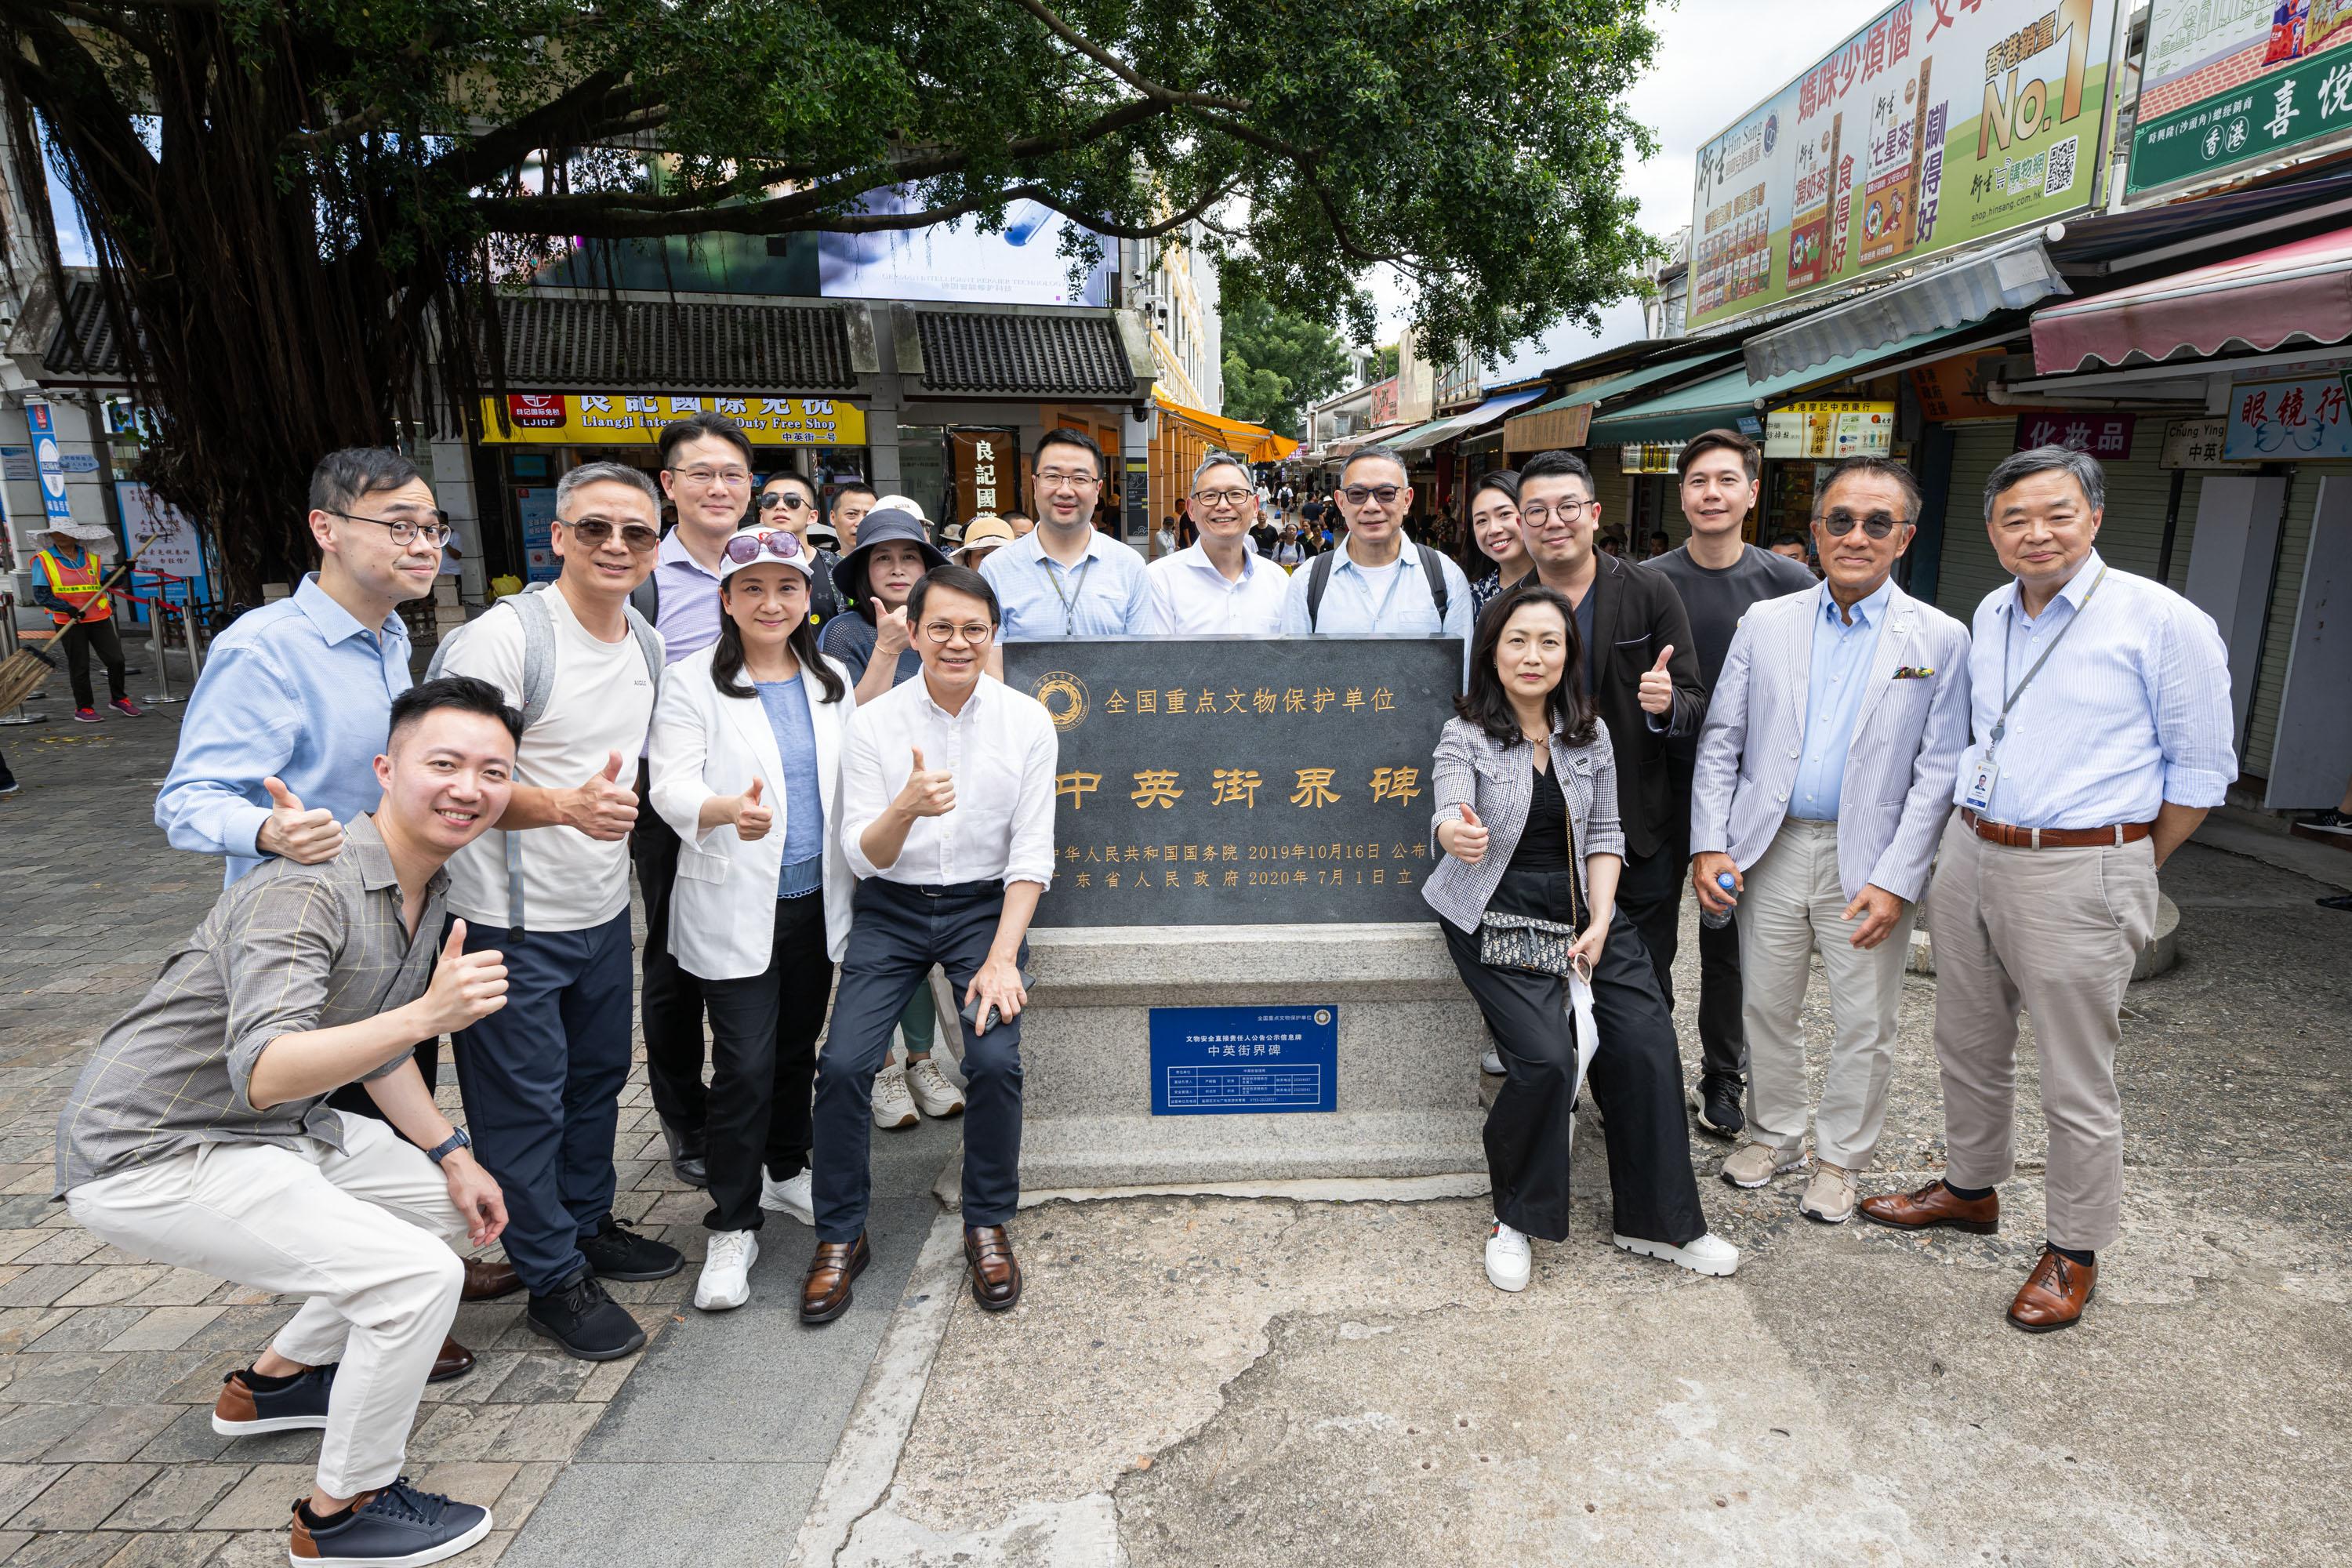 The Legislative Council (LegCo) Panel on Security visits Sha Tau Kok and Liantang/Heung Yuen Wai Boundary Control Point today (July 11). Photo shows LegCo Members and representatives of the Administration posing for a group photo at the Anglo-Chinese boundary stone in Chung Ying Street.